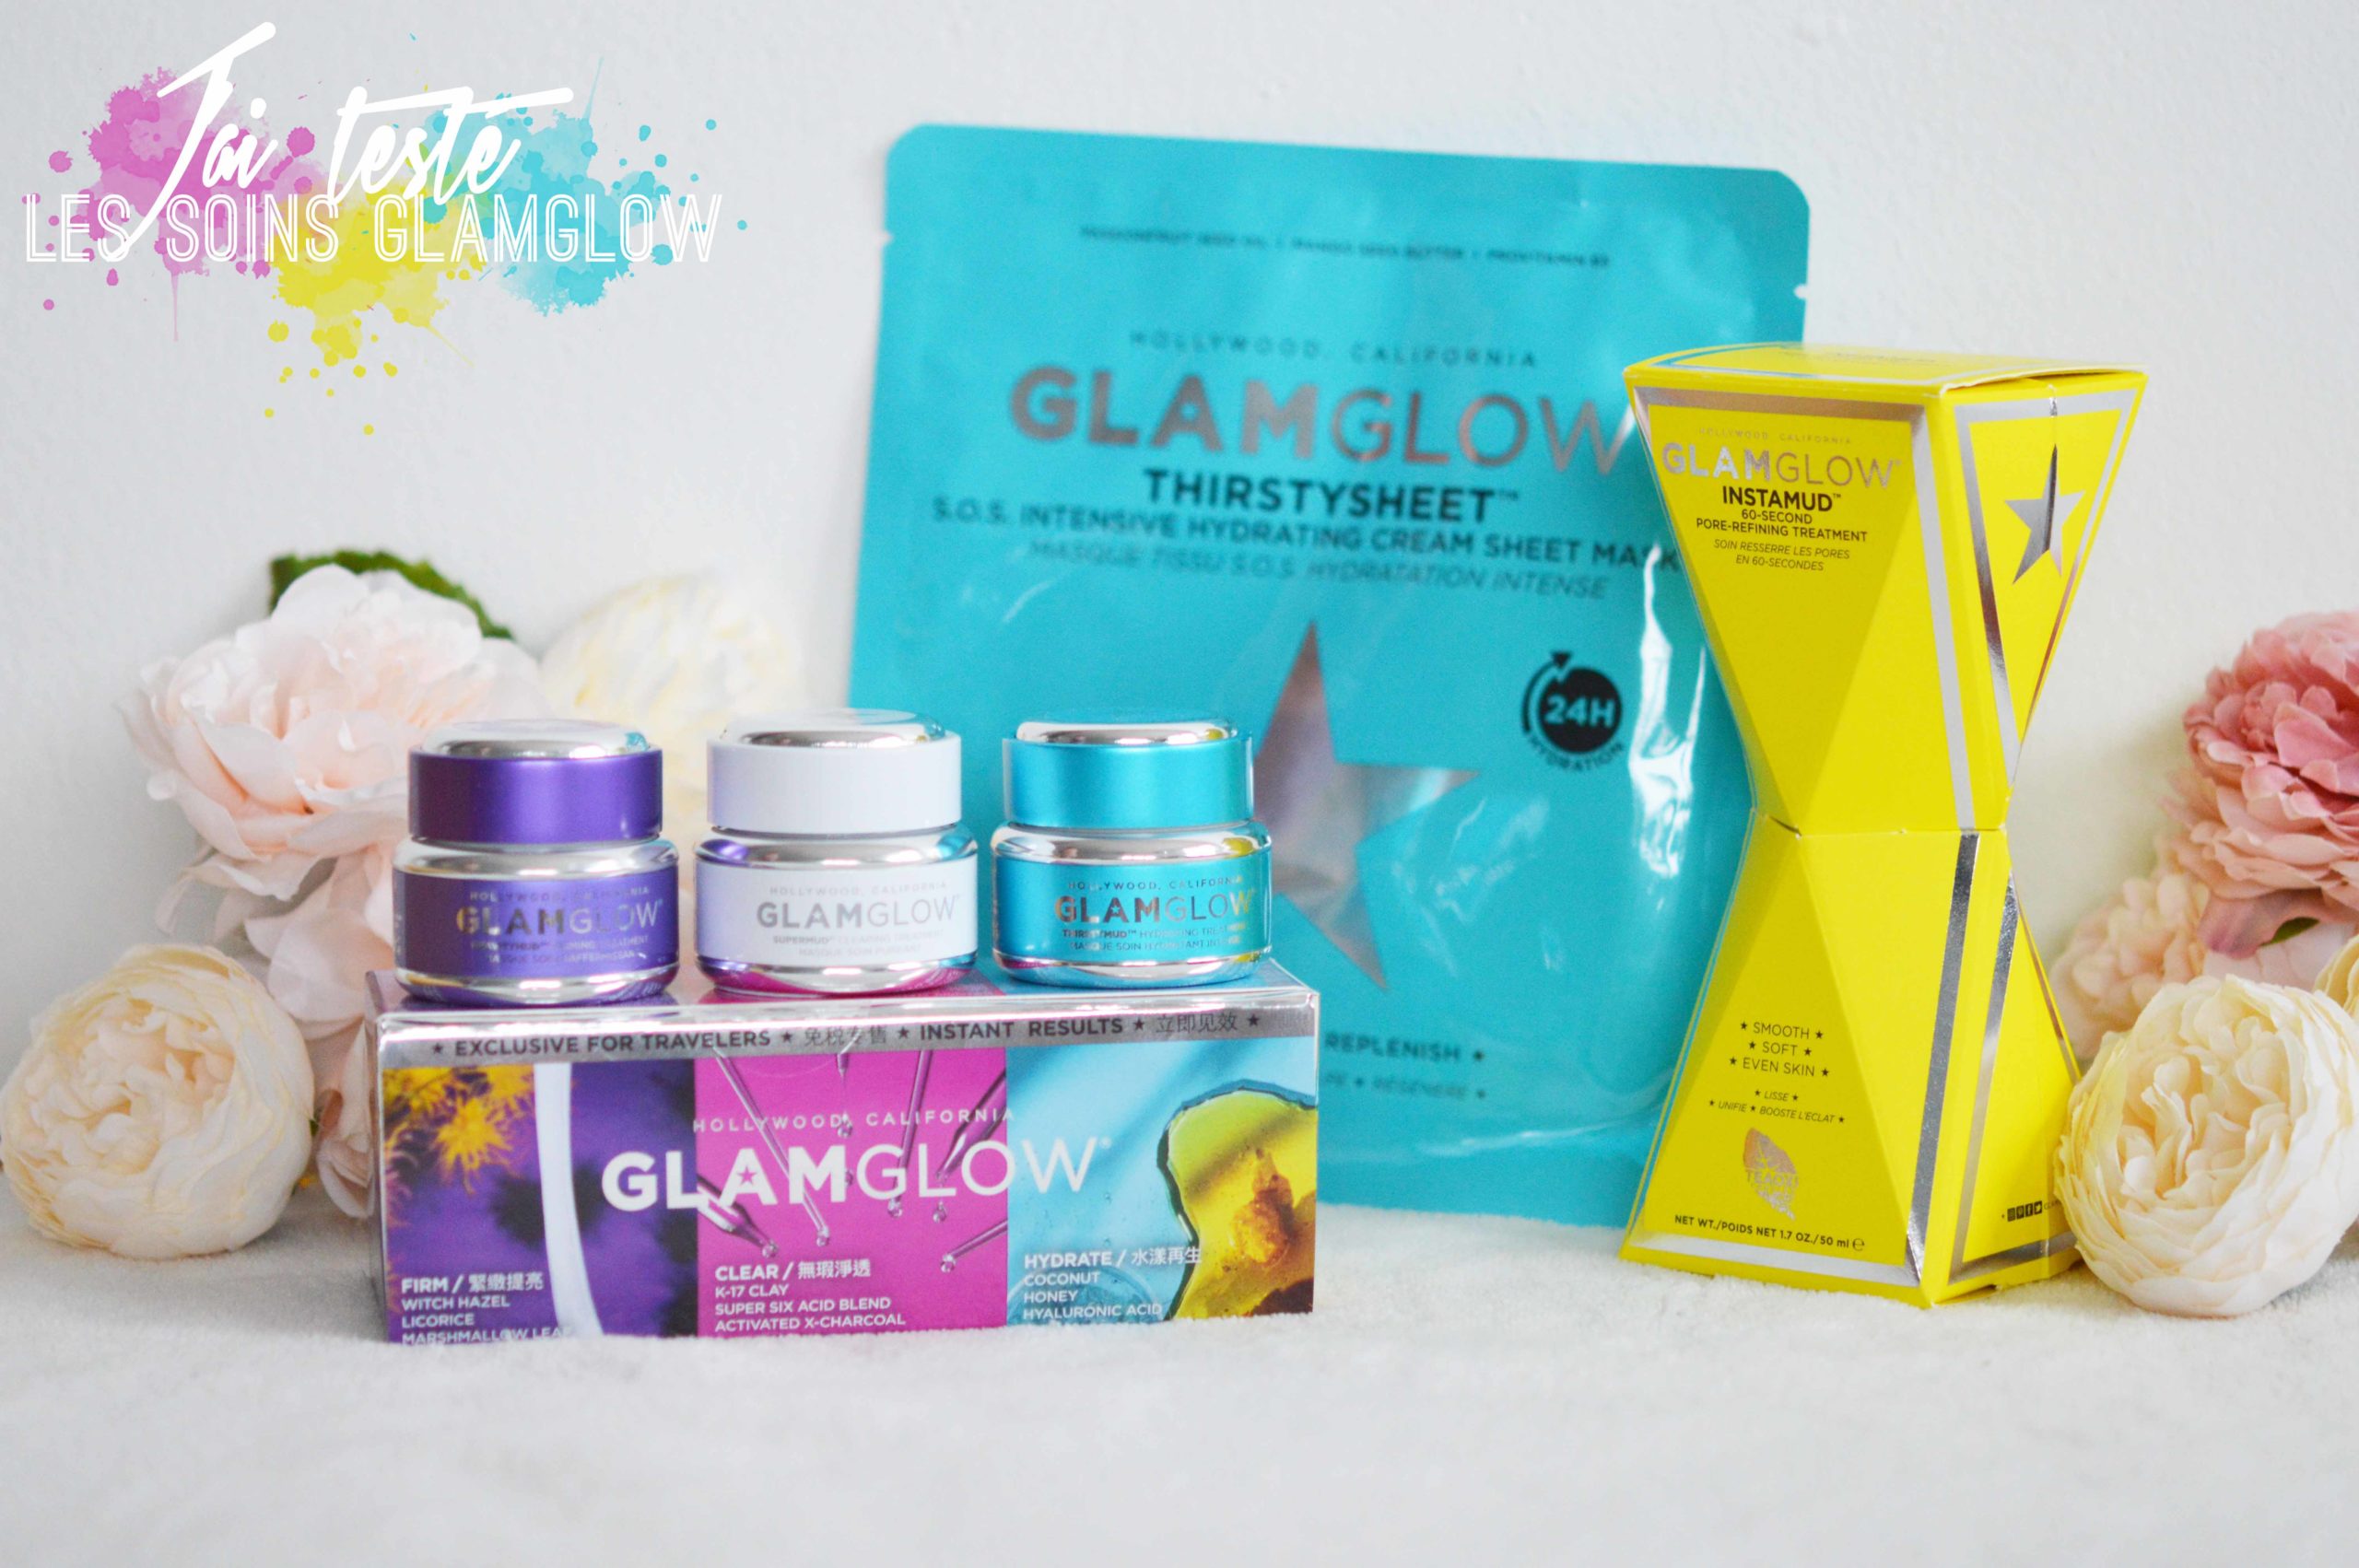 Les soins glamglow sont sur notino 